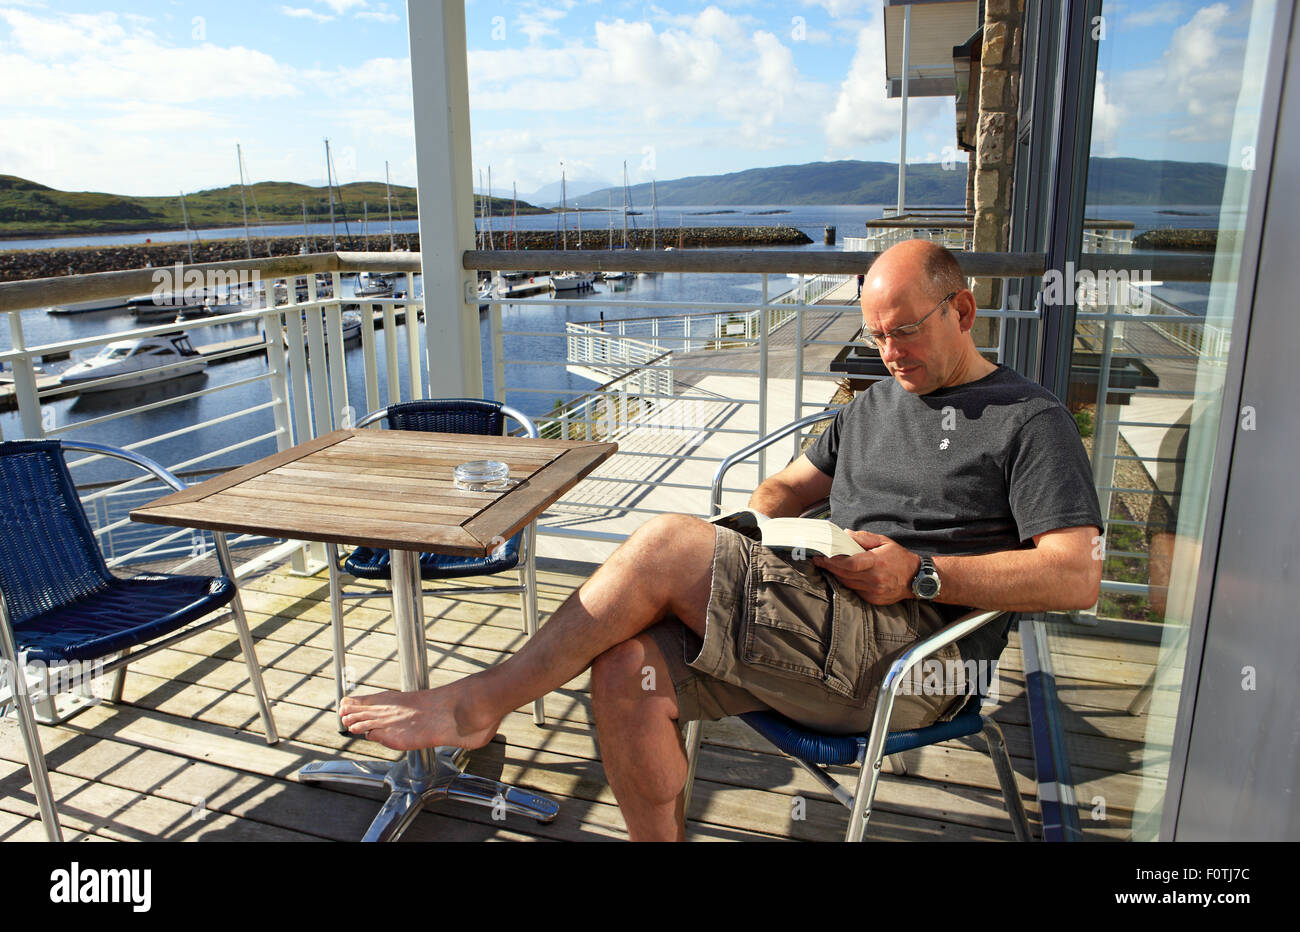 Man relaxing reading a book on a balcony in Portavadie Marina in Scotland on Loch Fyne Stock Photo